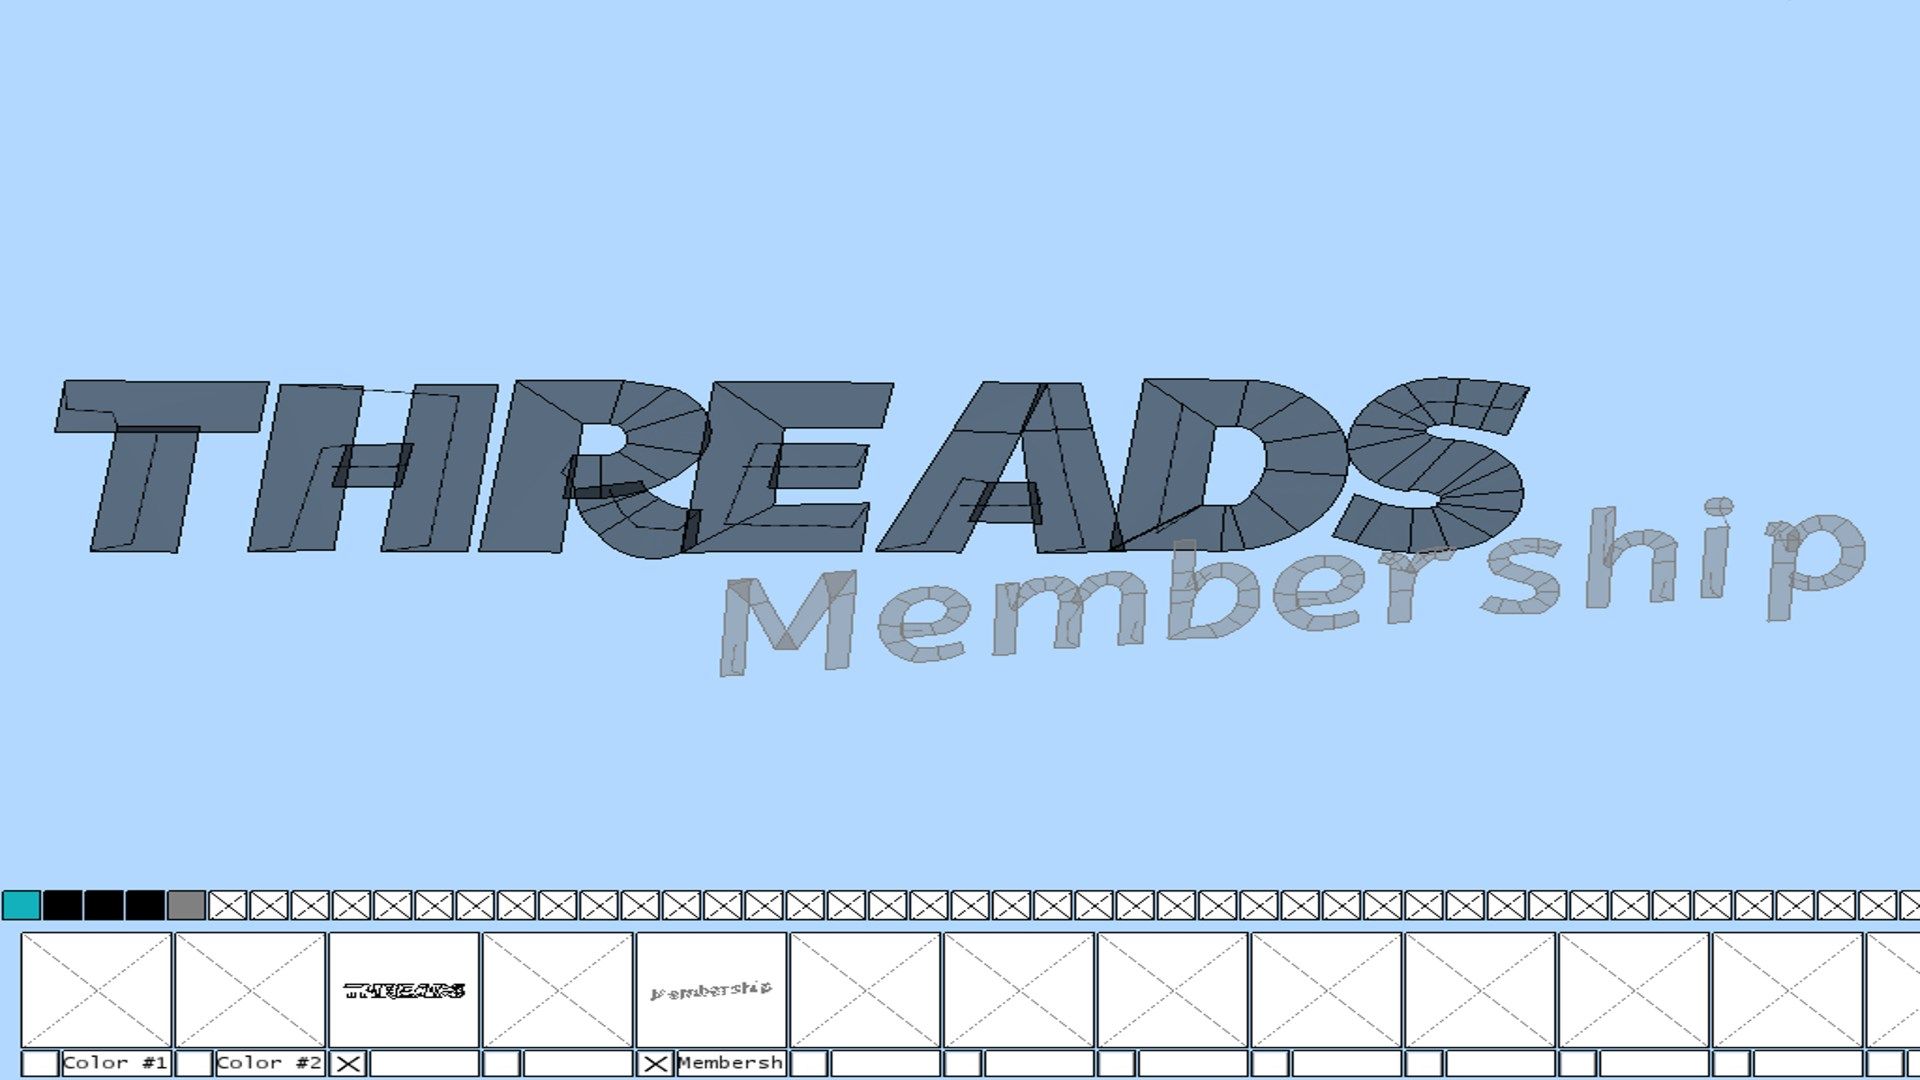 Threads Embroidery Software